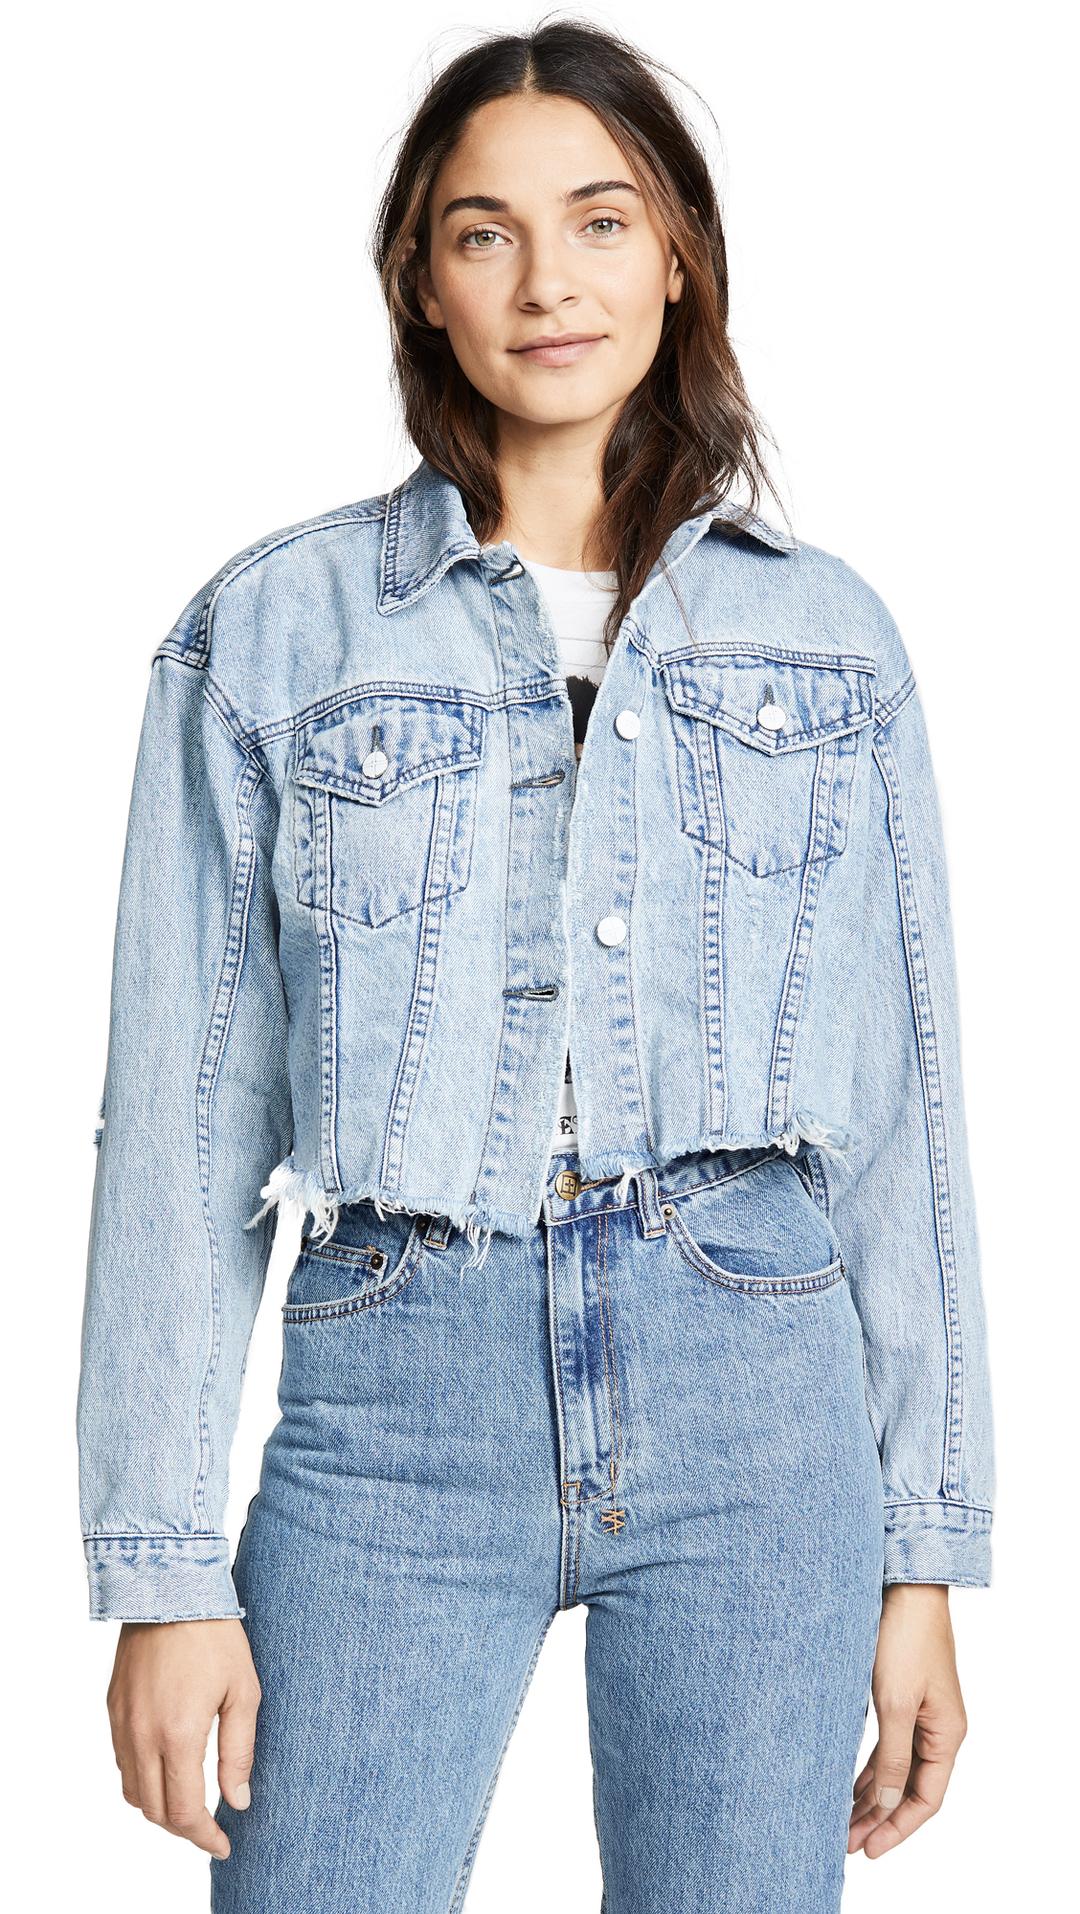 denim jacket 90s outfit